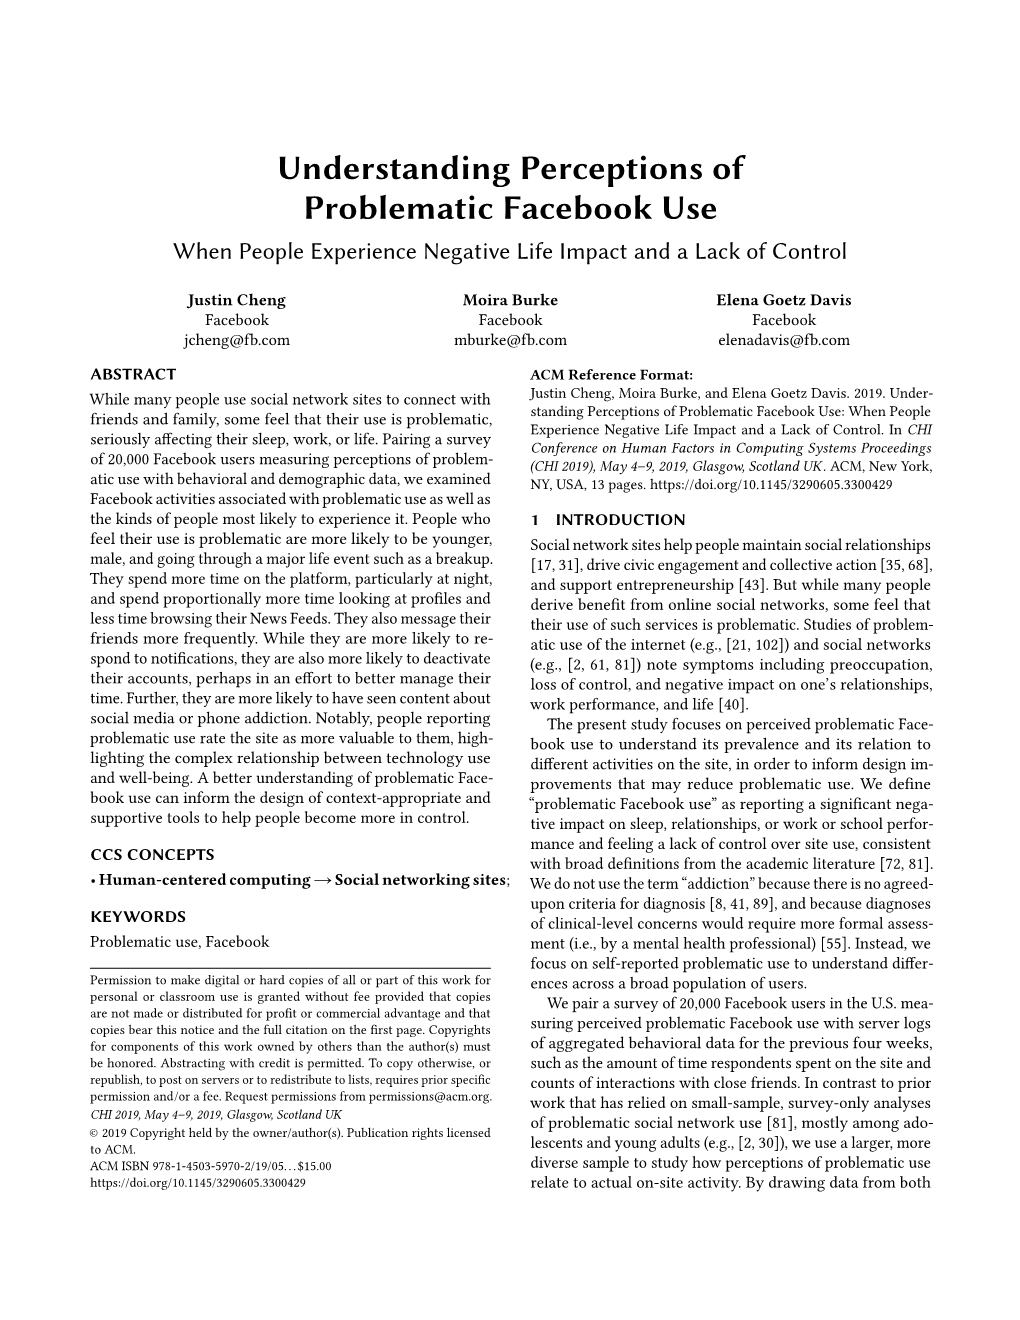 Understanding Perceptions of Problematic Facebook Use When People Experience Negative Life Impact and a Lack of Control